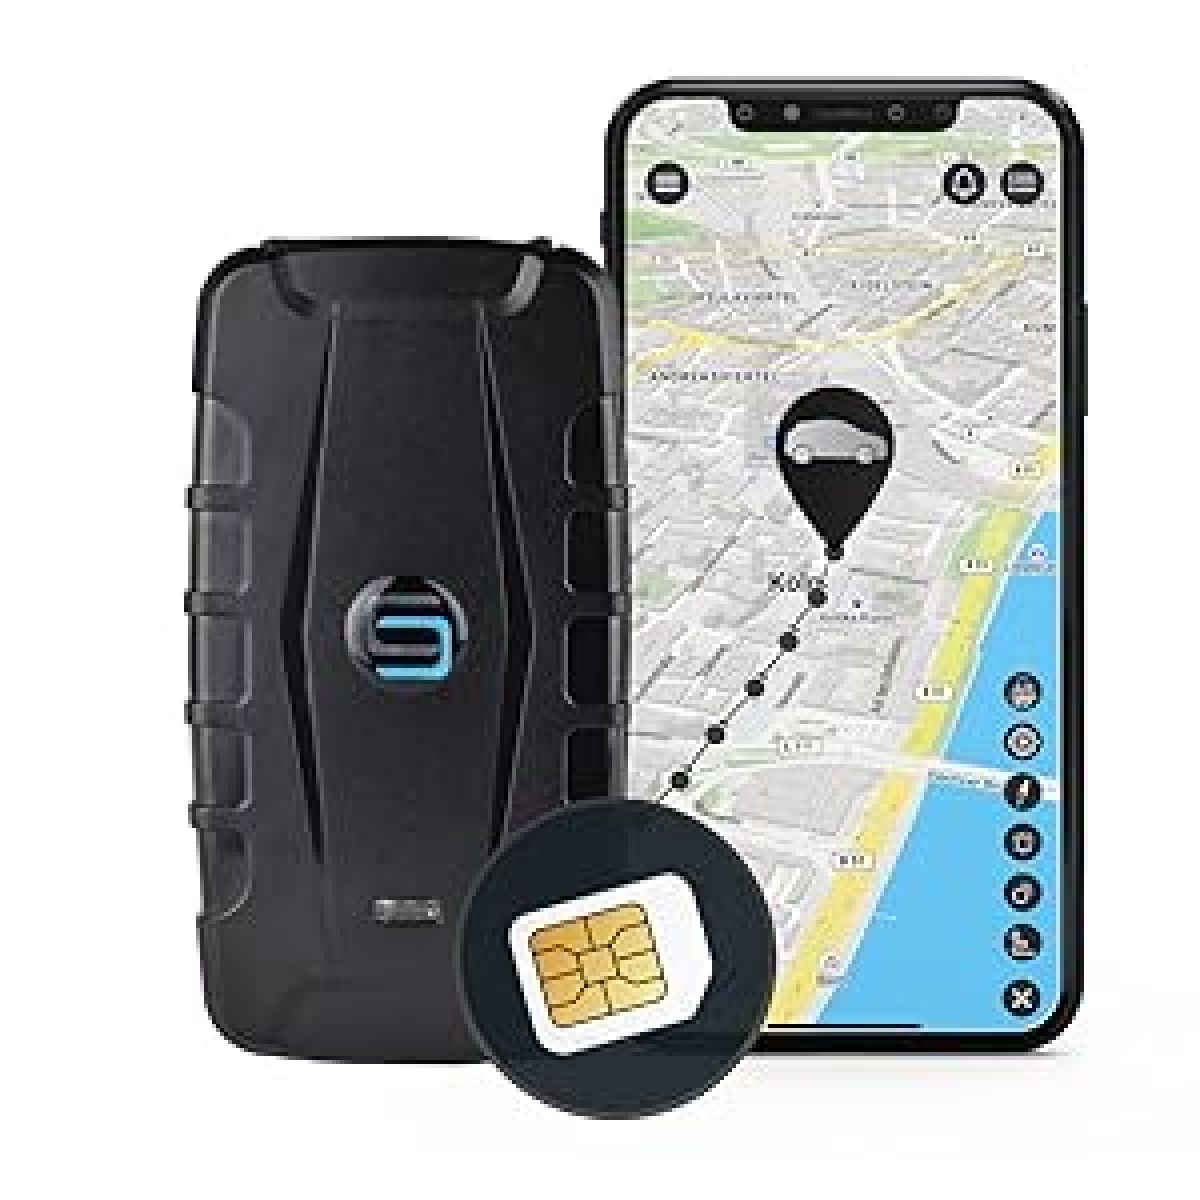 Salind 20 GPS Tracker 4G for Cars, Machines, Boats